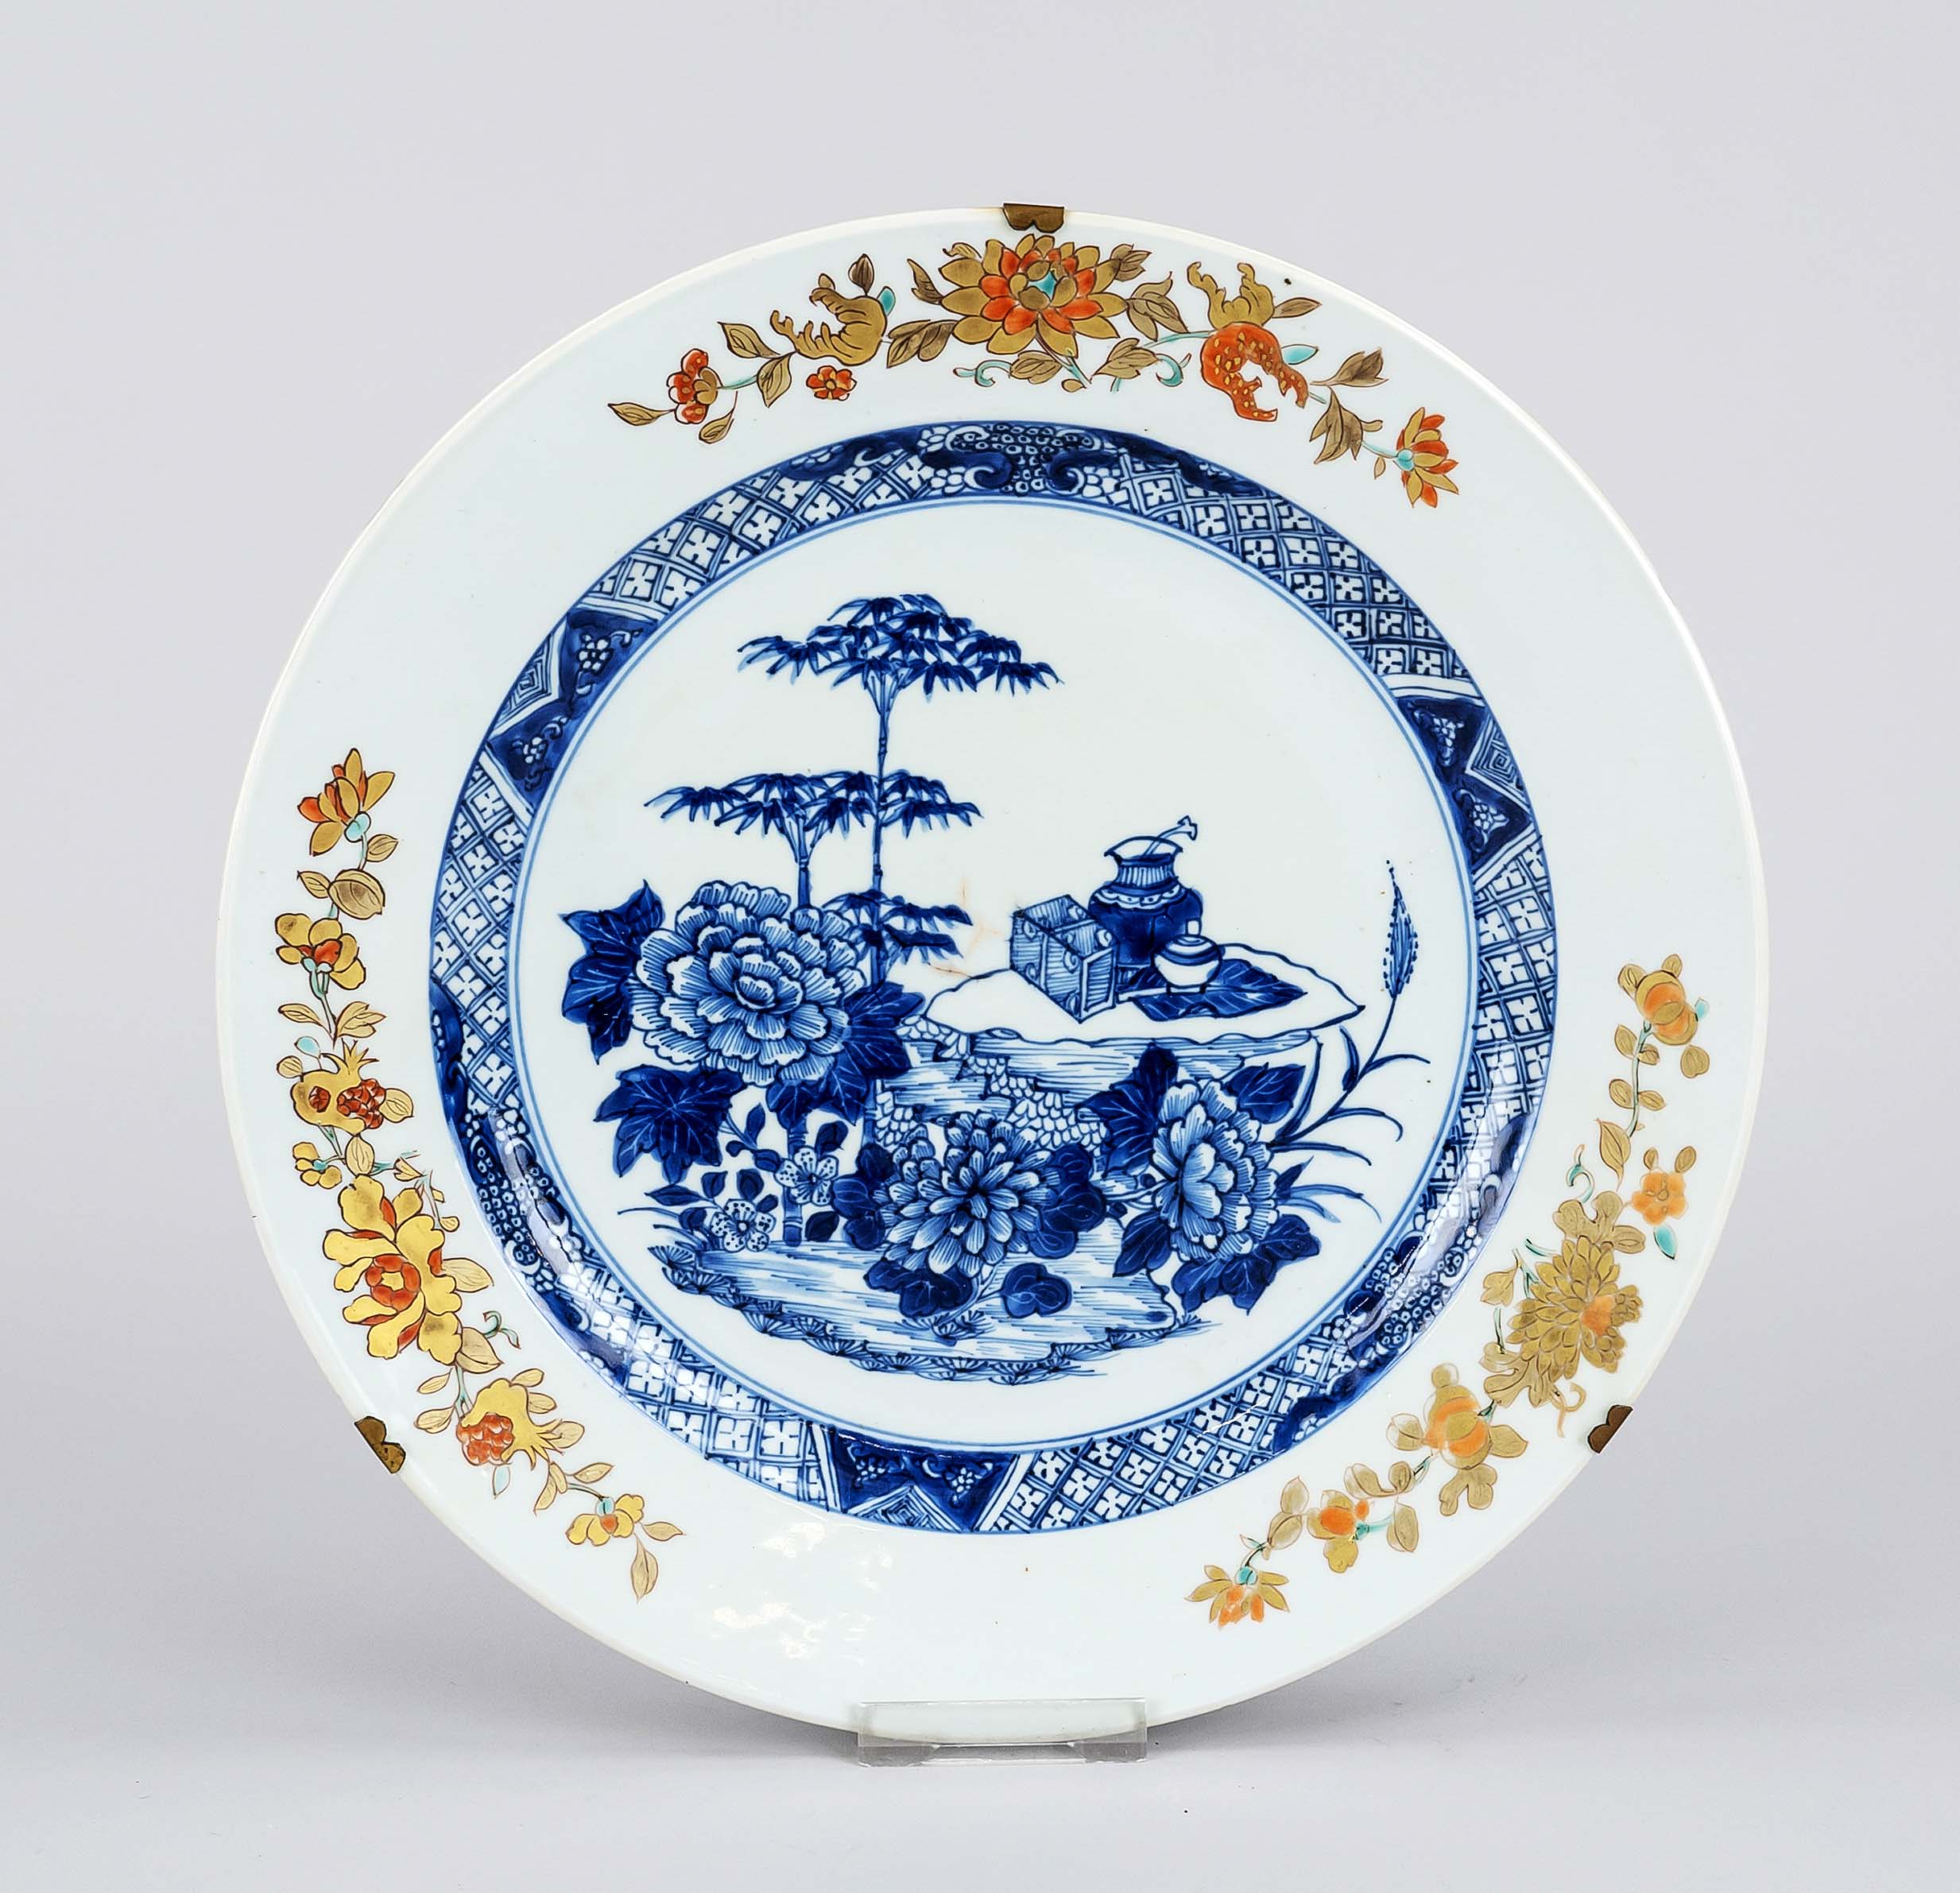 Export plate gold flowers, China, Qing dynasty(1644-1912), 18th century, porcelain with cobalt